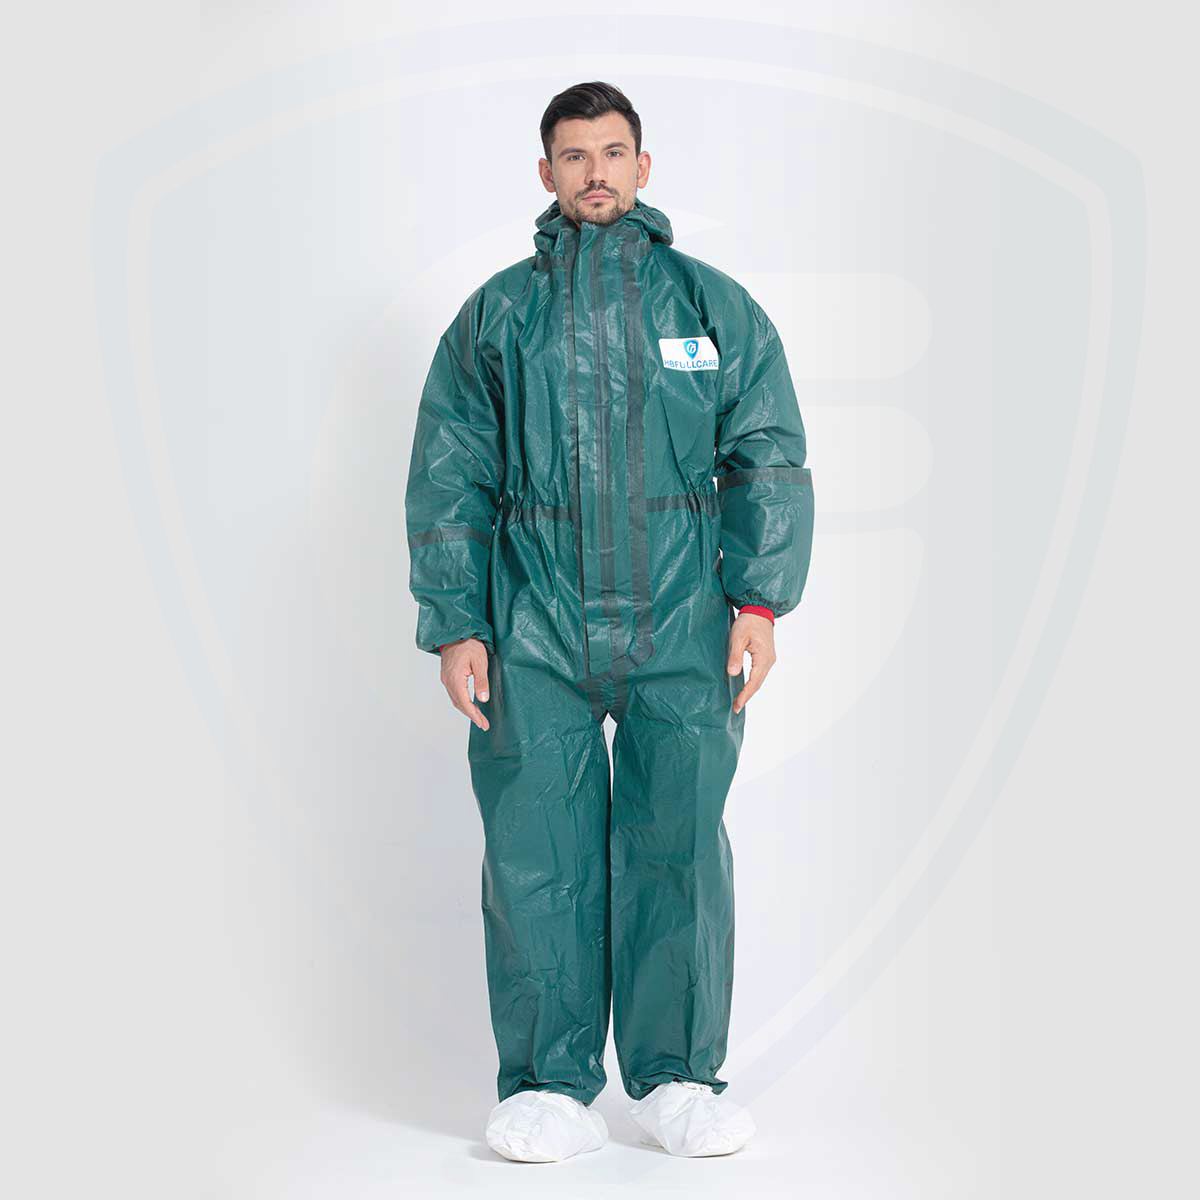 FC2090 Disposable Green Chemical Coverall with Full-Body Protection Type3/4/5